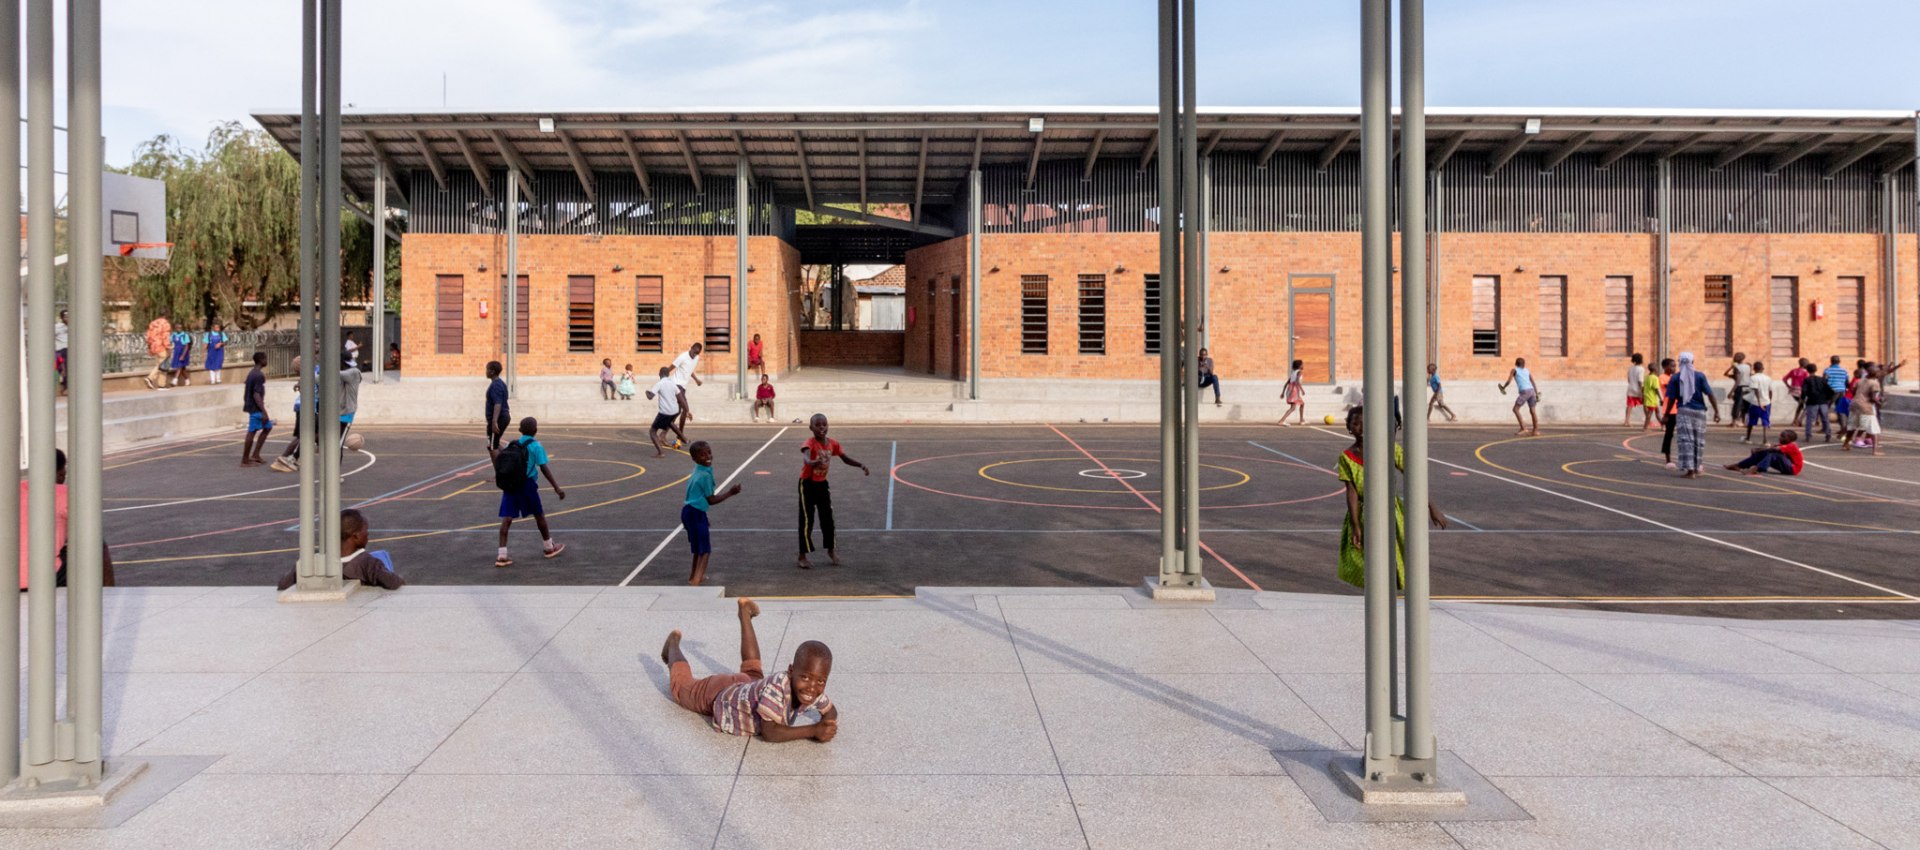 Opening of the Kamokia Community Center by Kerry Architects |  About architecture and more